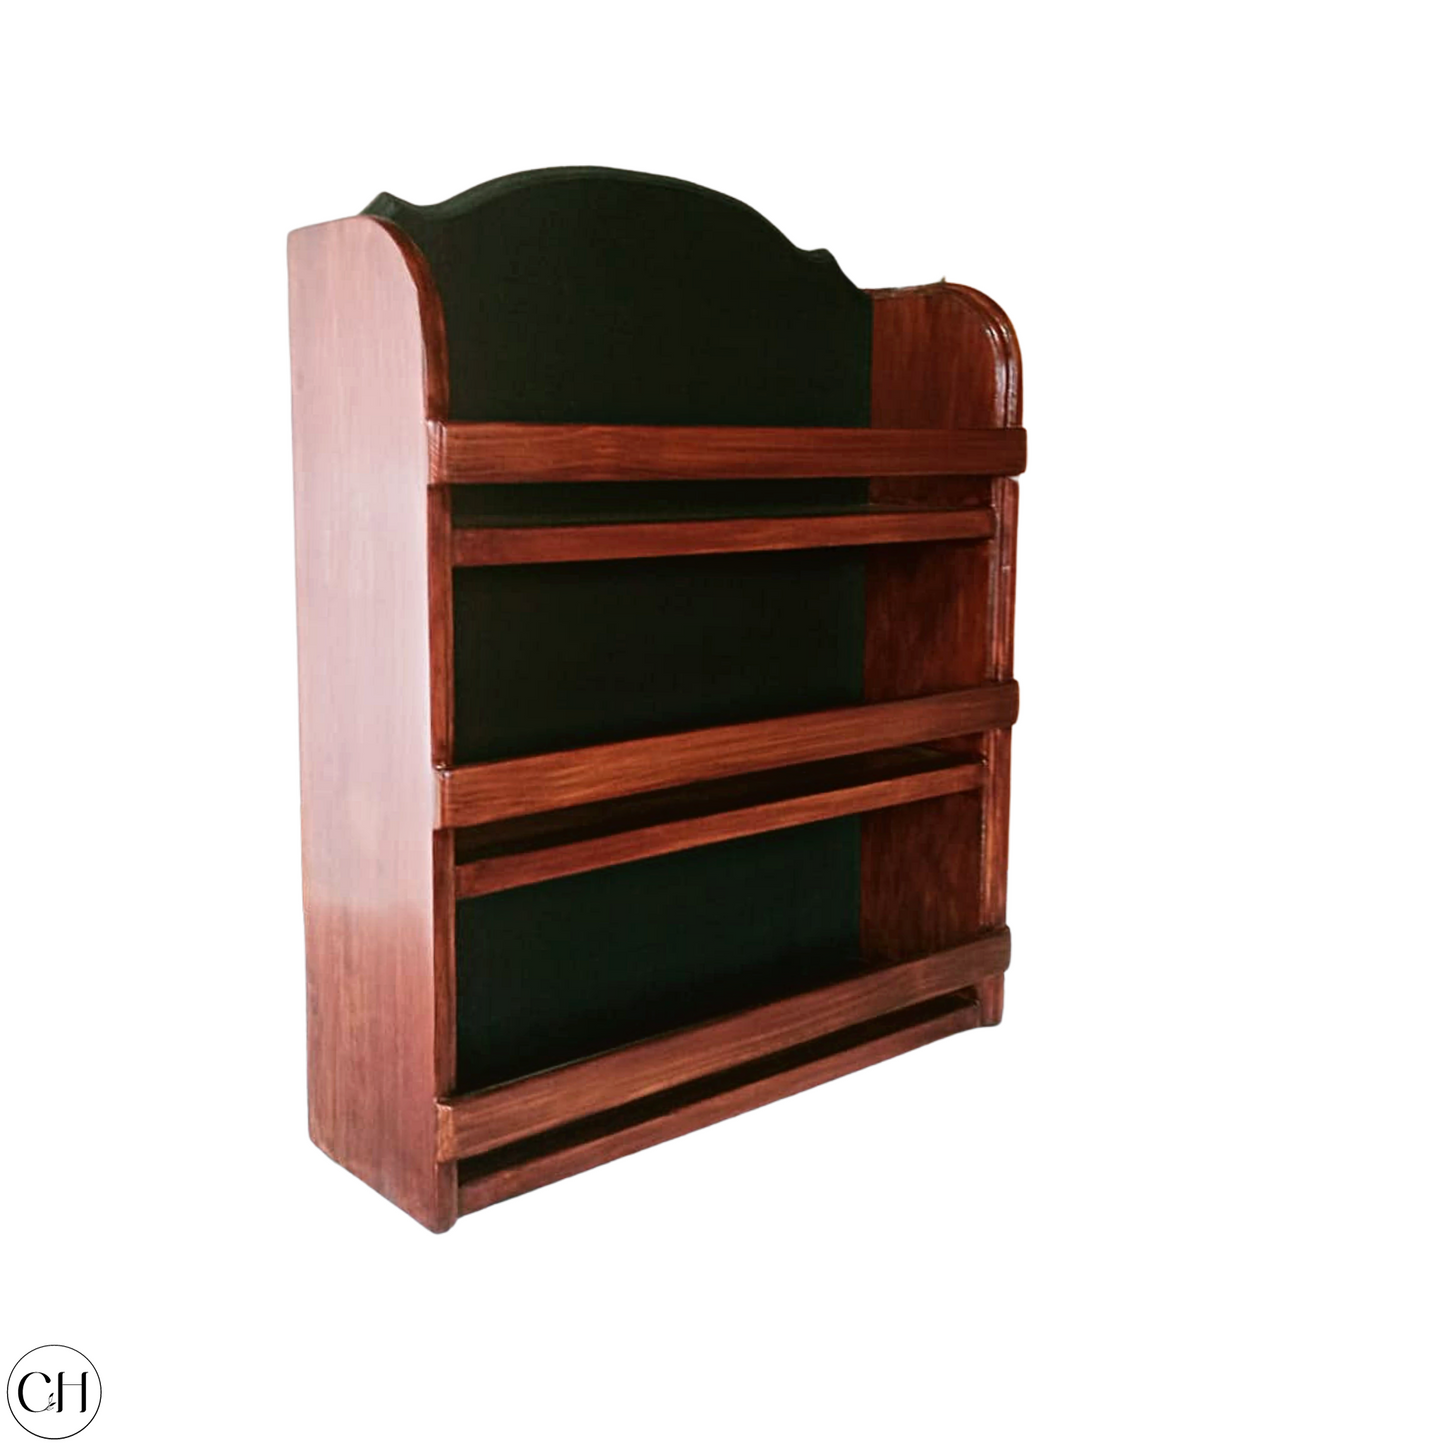 CustHum wallmounted wooden spice rack with blackboard painted back (light teak color)